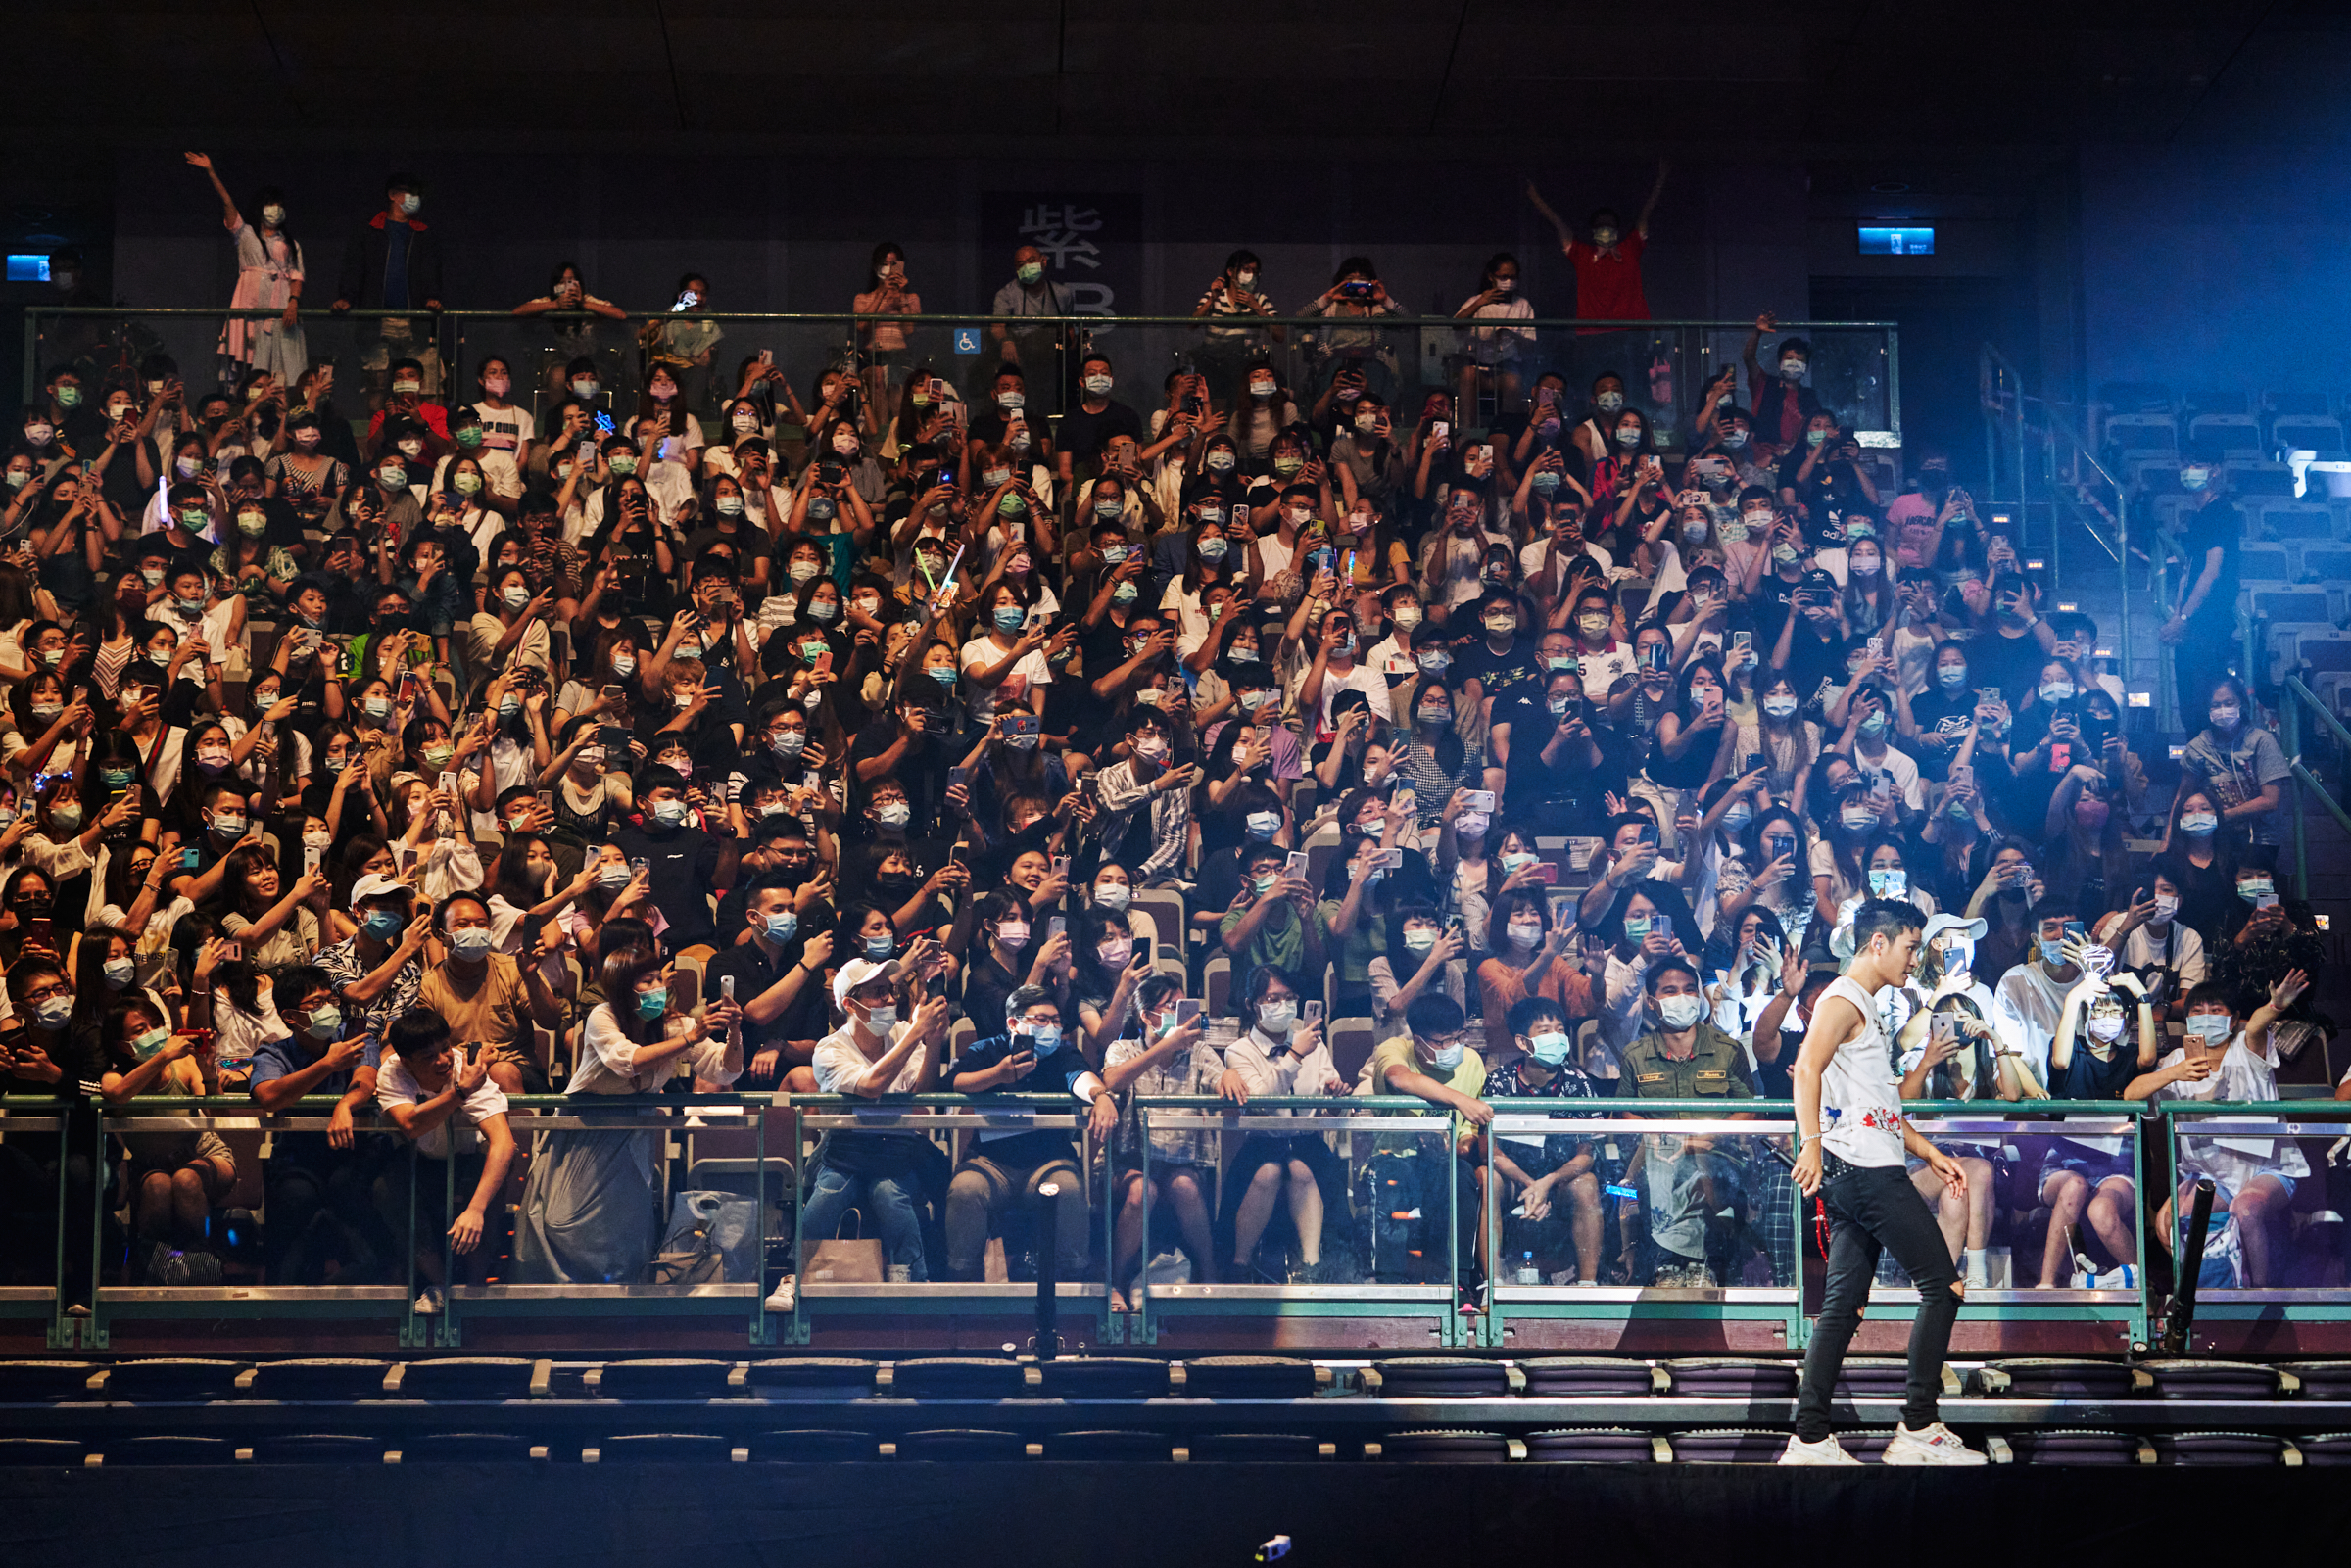 <a href="https://time.com/5880129/concerts-coronavirus-taiwan/" target="_blank" rel="noopener noreferrer">Eric Chou</a> walks on an extended stage that brought him close to fans sitting on the second level of the Taipei Arena on Aug. 8. (An Rong Xu for TIME)